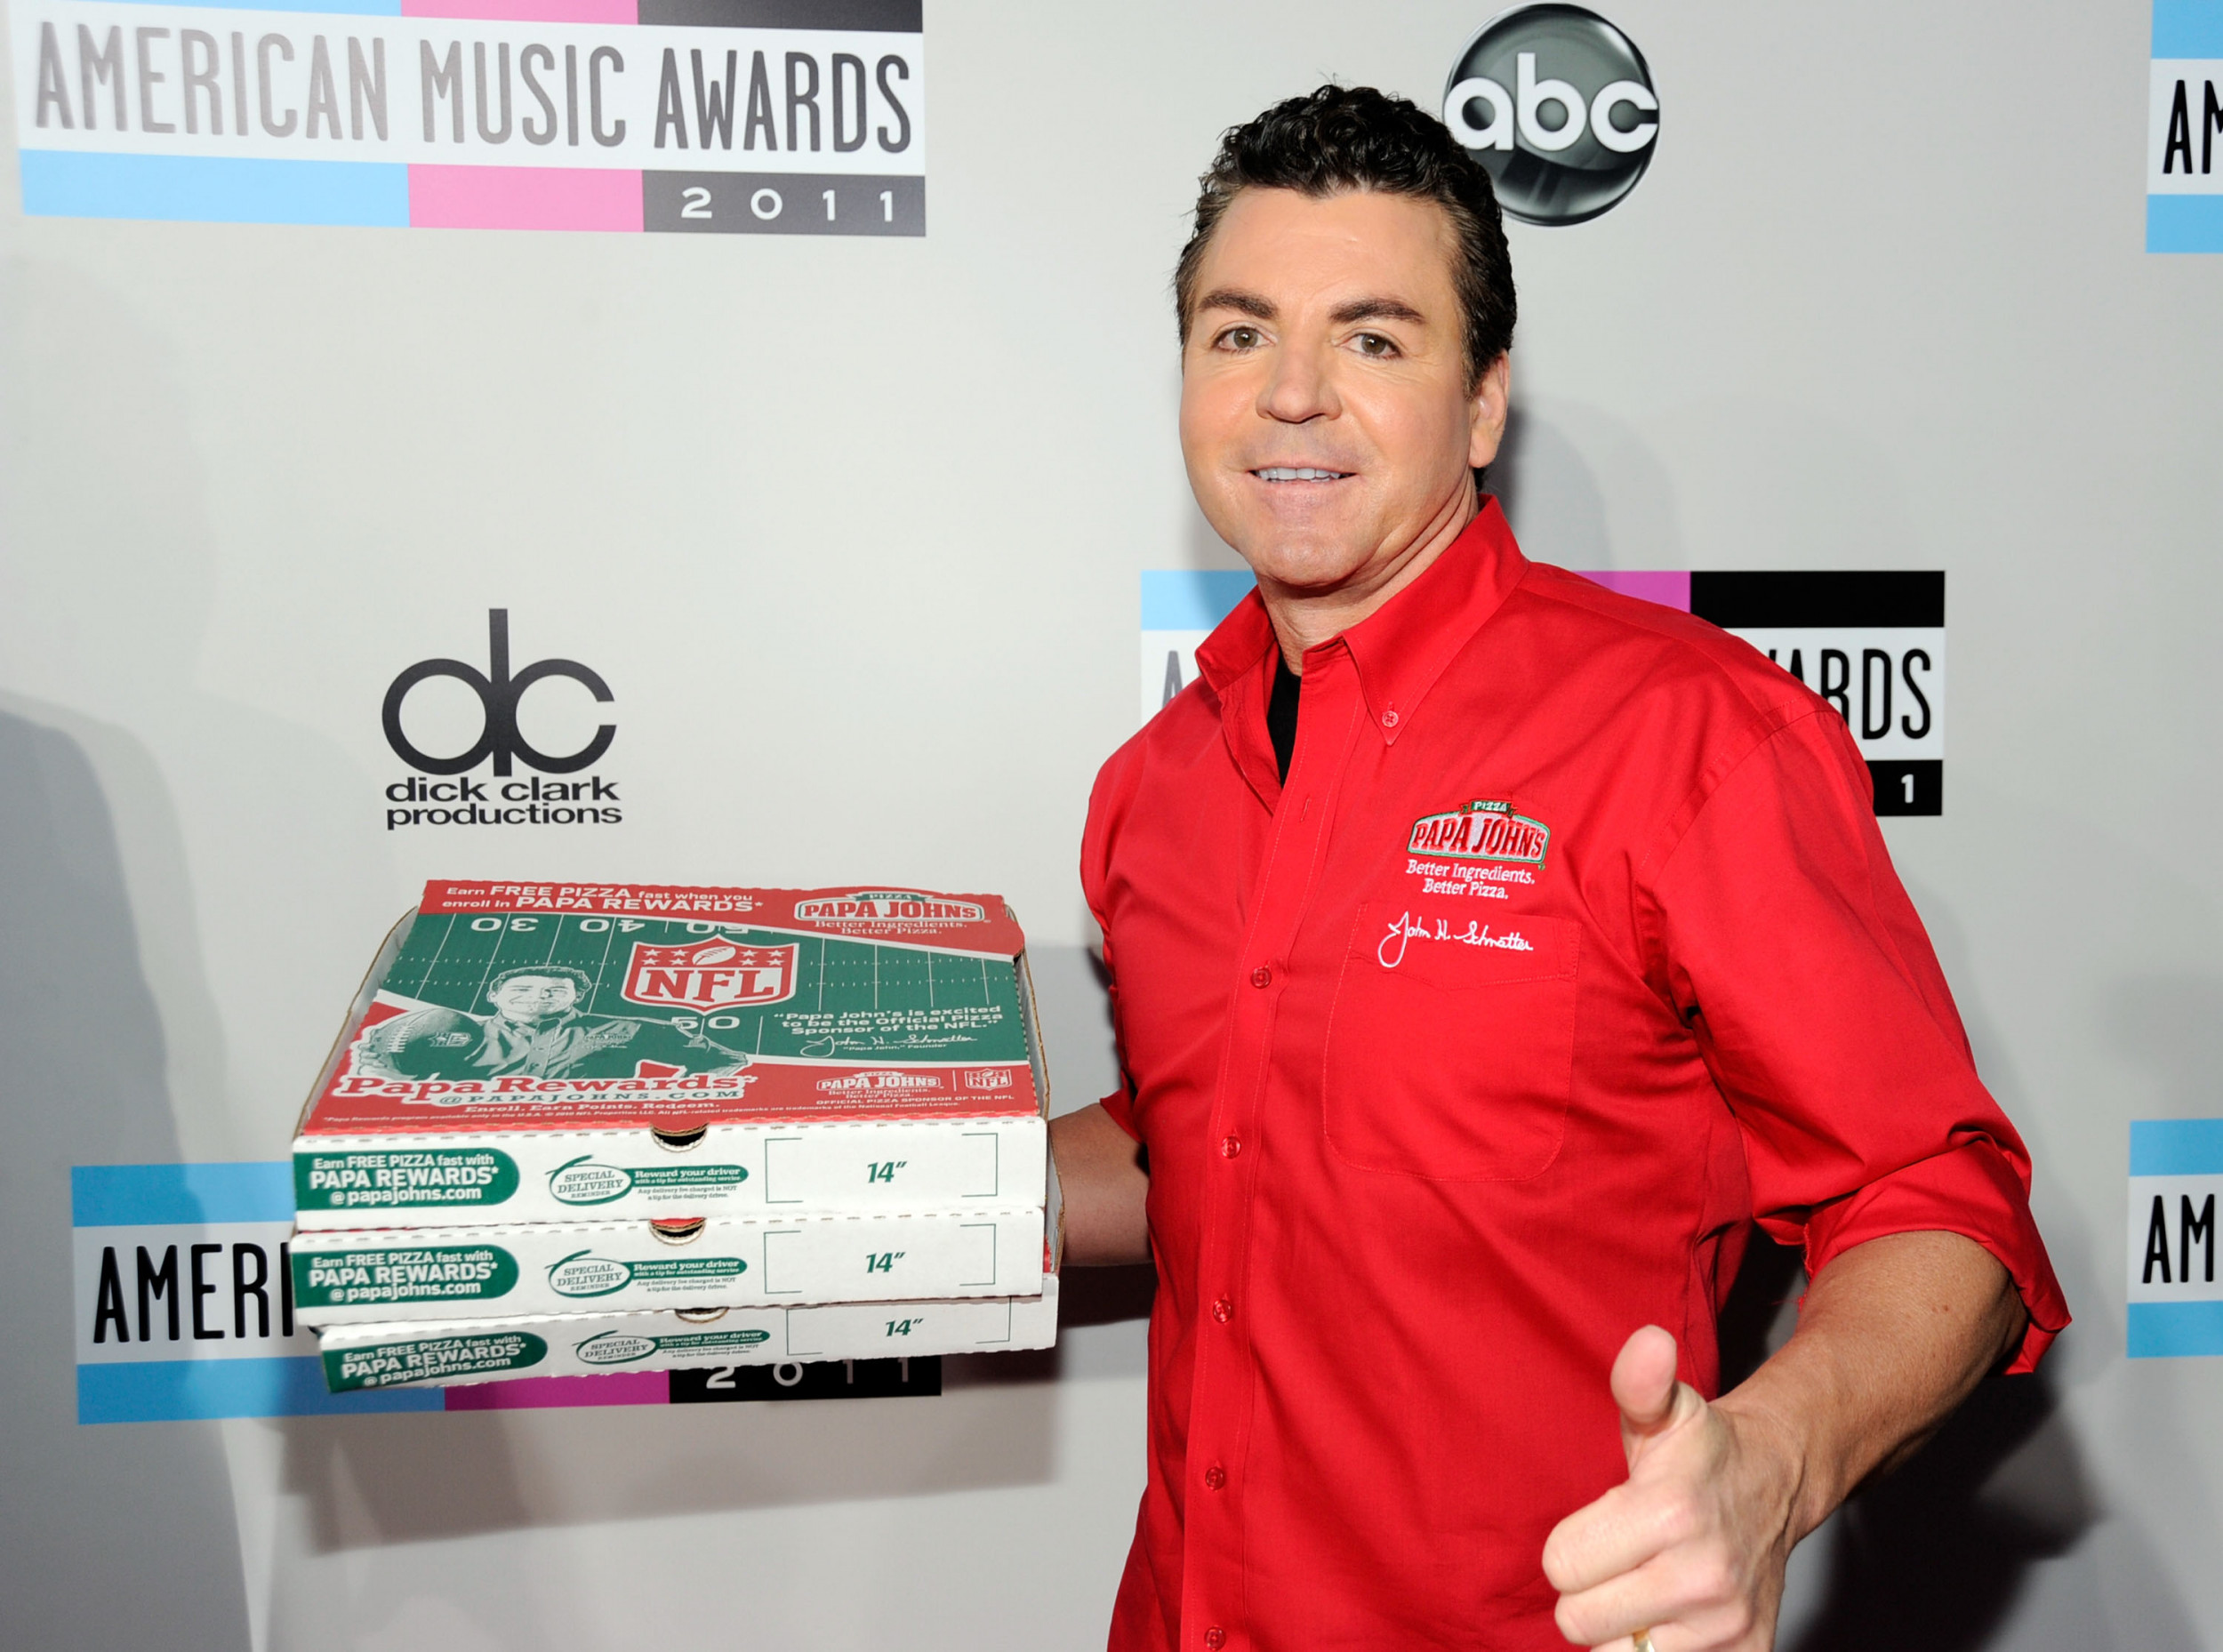 Papa John's Founder John Schnatter Says Board Conspired to Oust Him